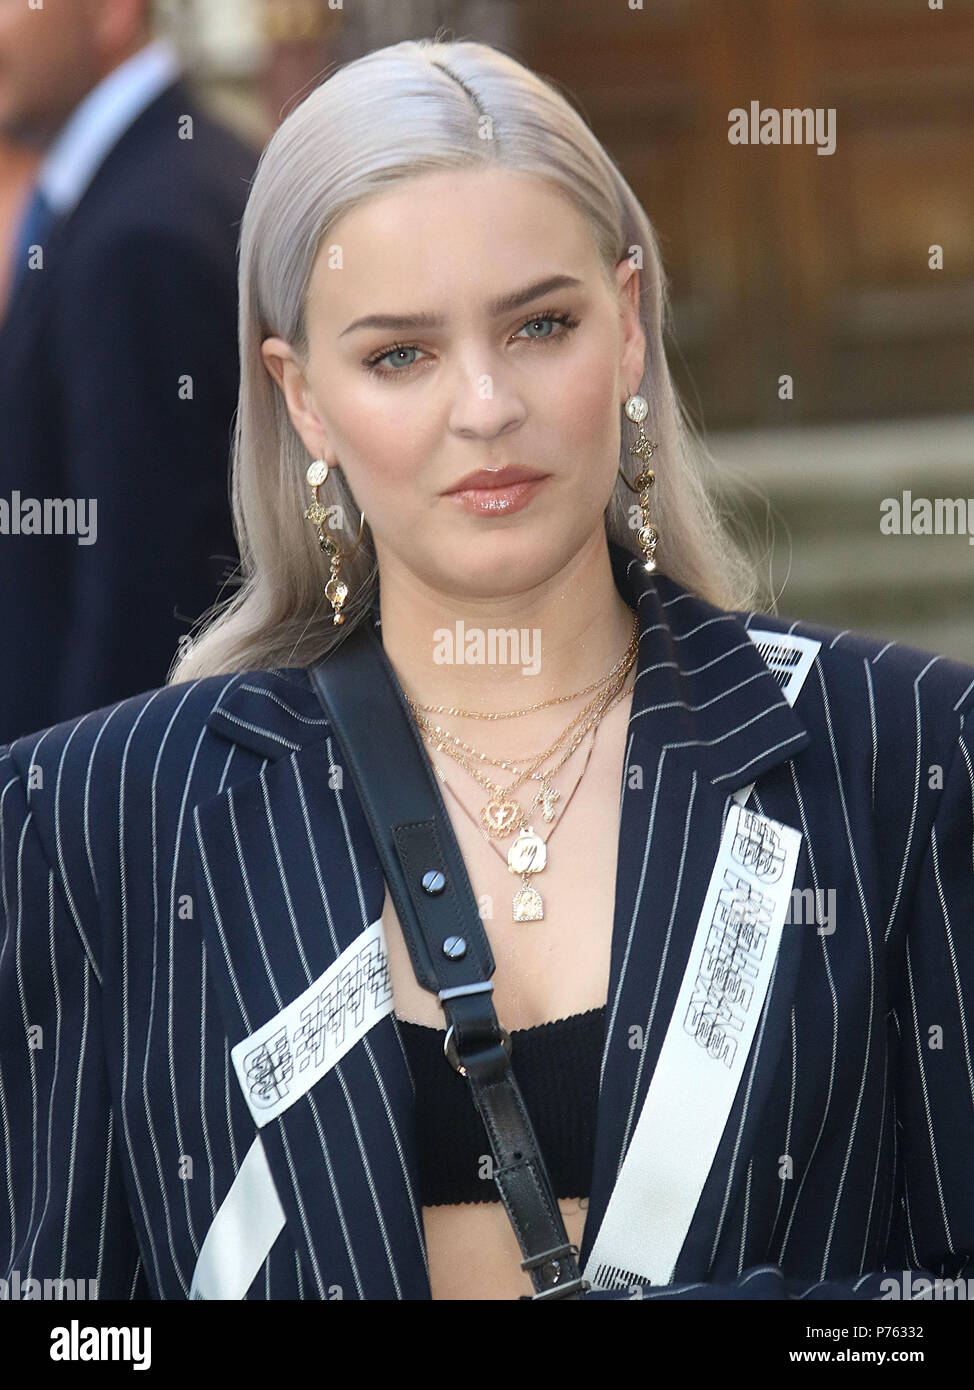 Jun 06, 2018 - Anne-Marie attending Royal Academy Of Arts 250th Summer Exhibition Preview Party at Burlington House in London, England, UK Stock Photo